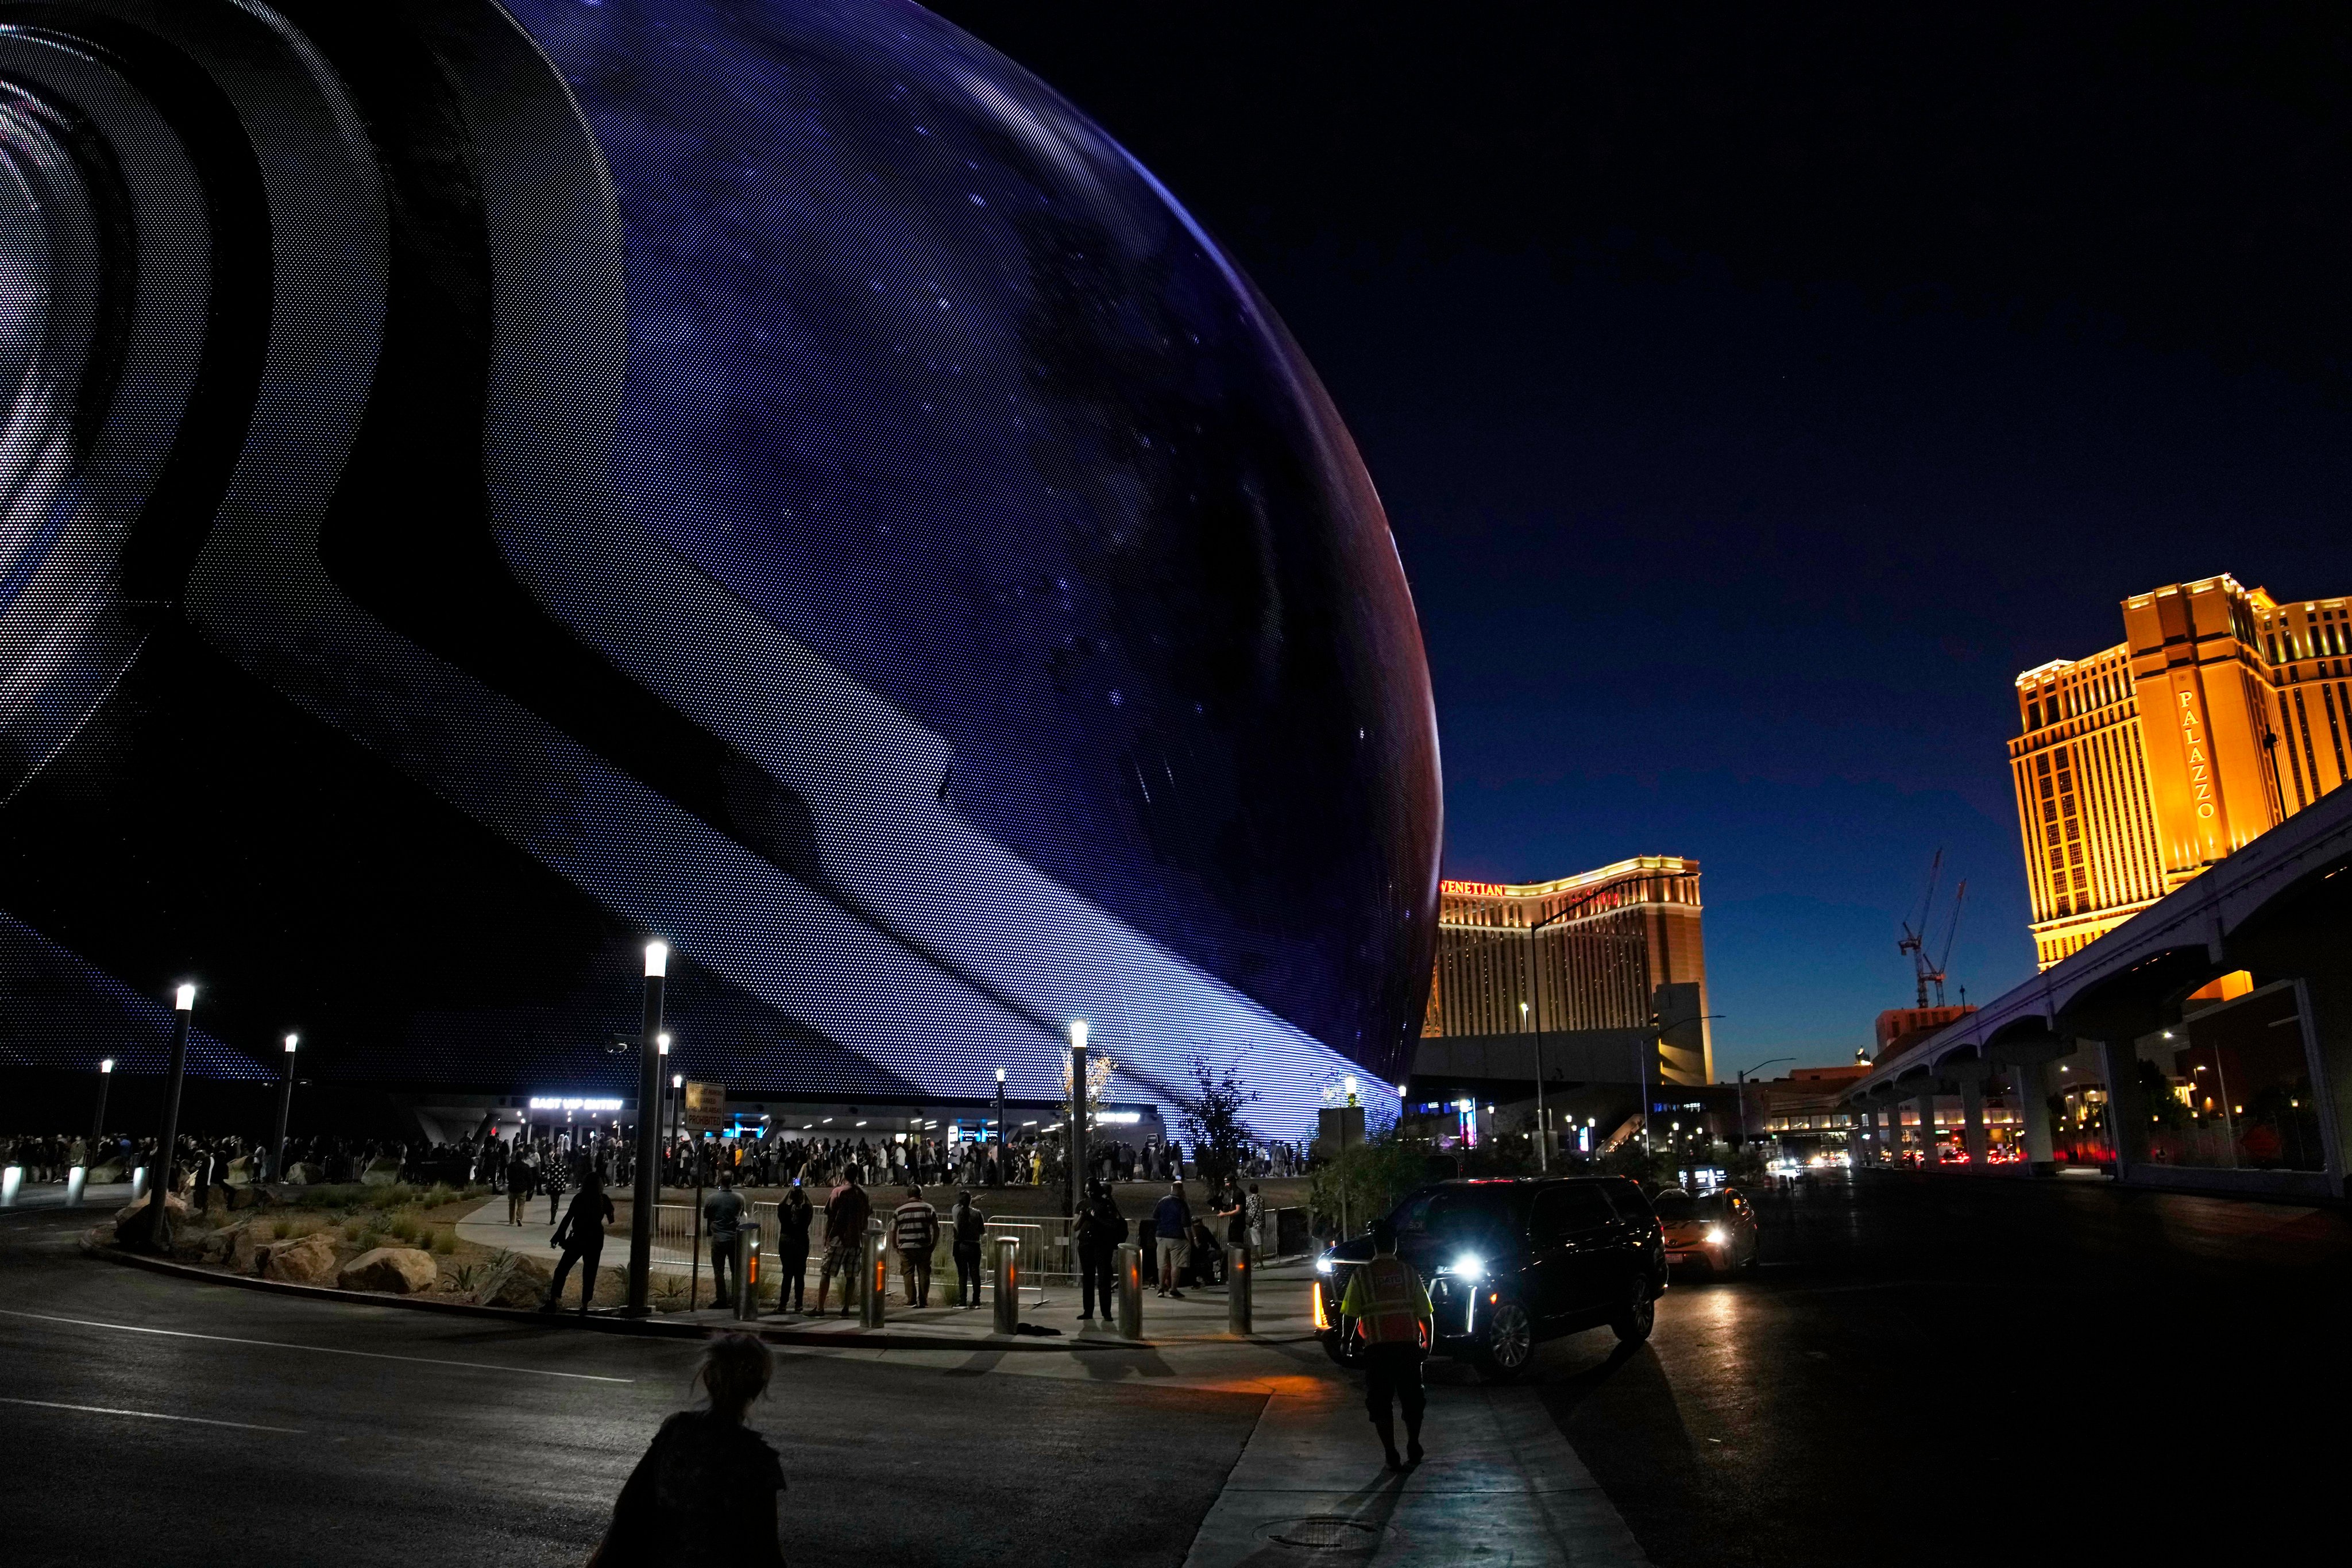 People arrive during the opening night of the Sphere on September 29 in Las Vegas. Photo: AP